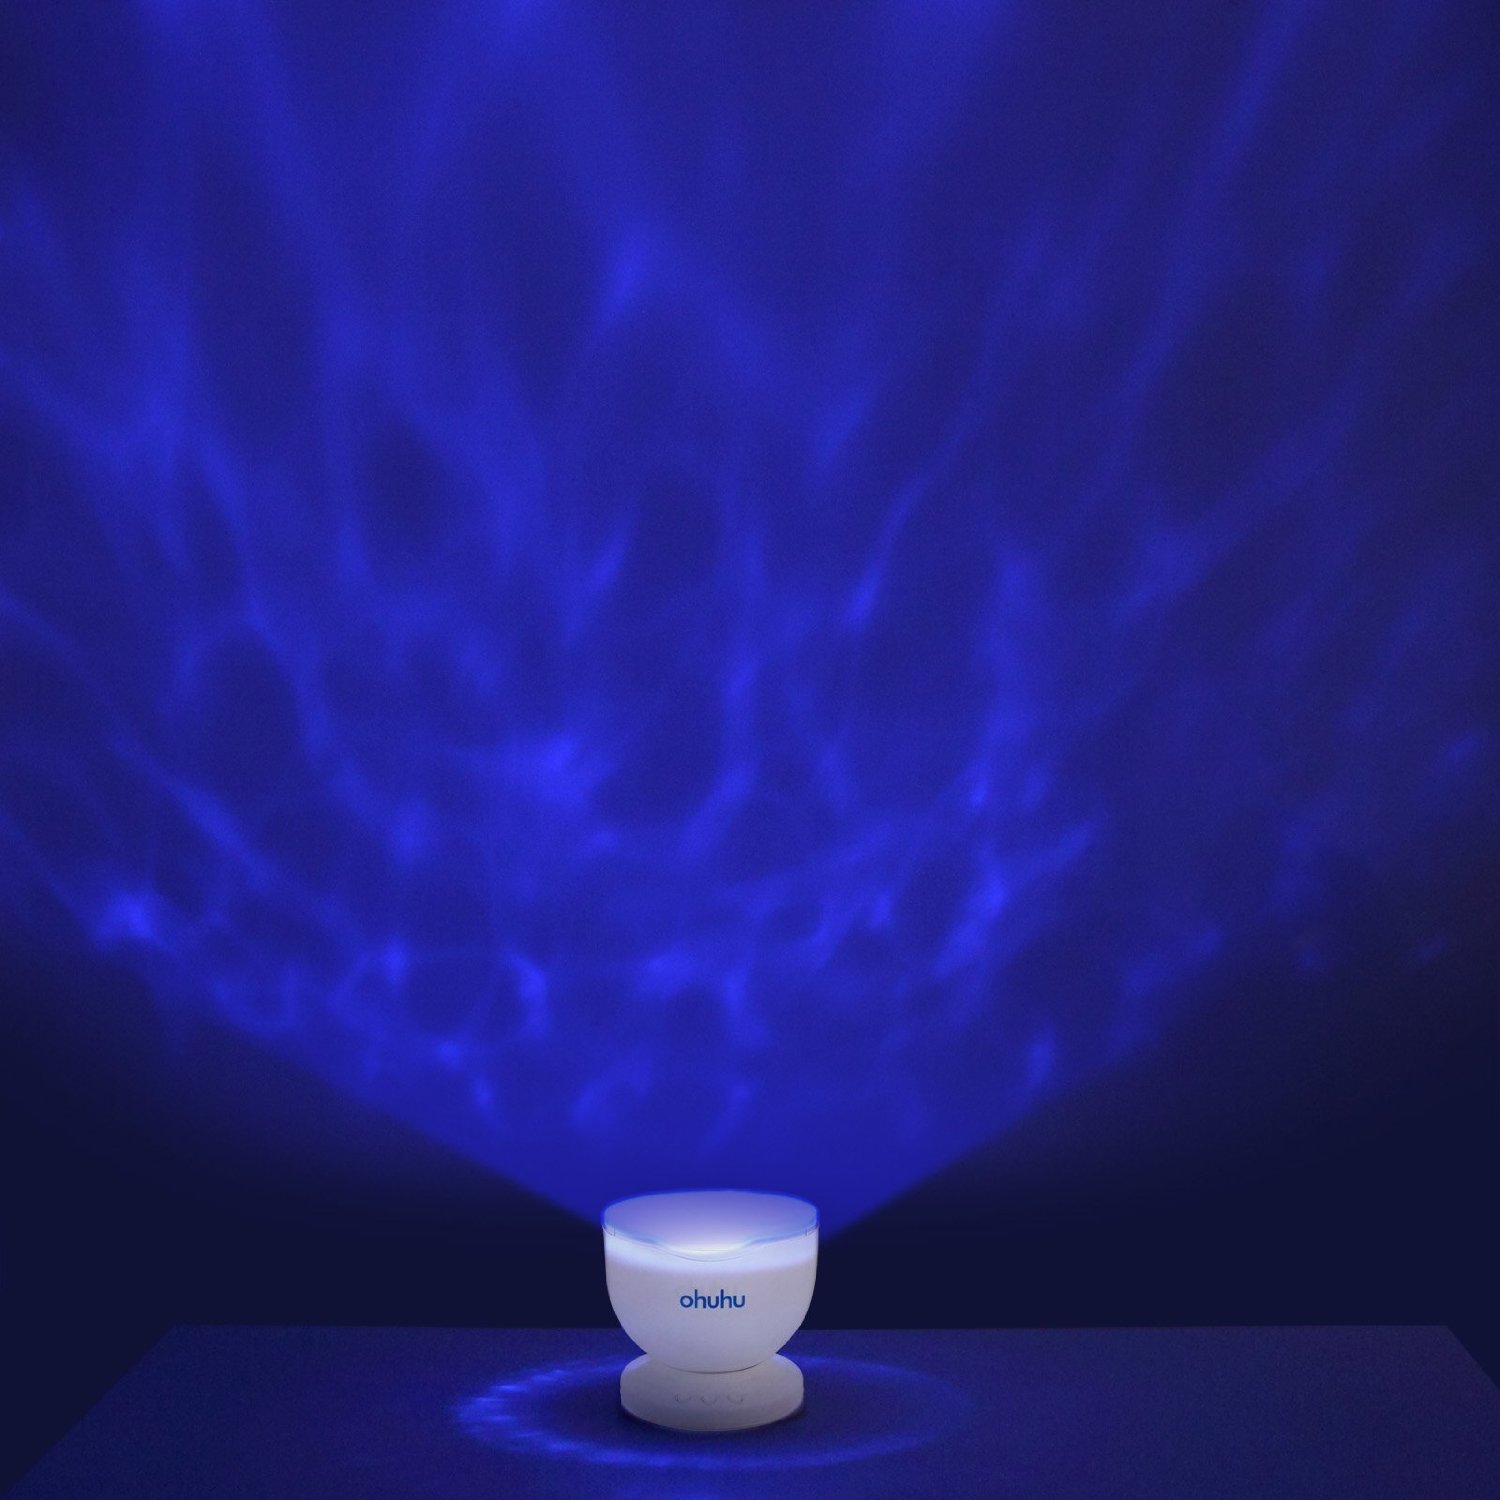 Relaxing with the Ohuhu Ocean Wave Night Light Projector